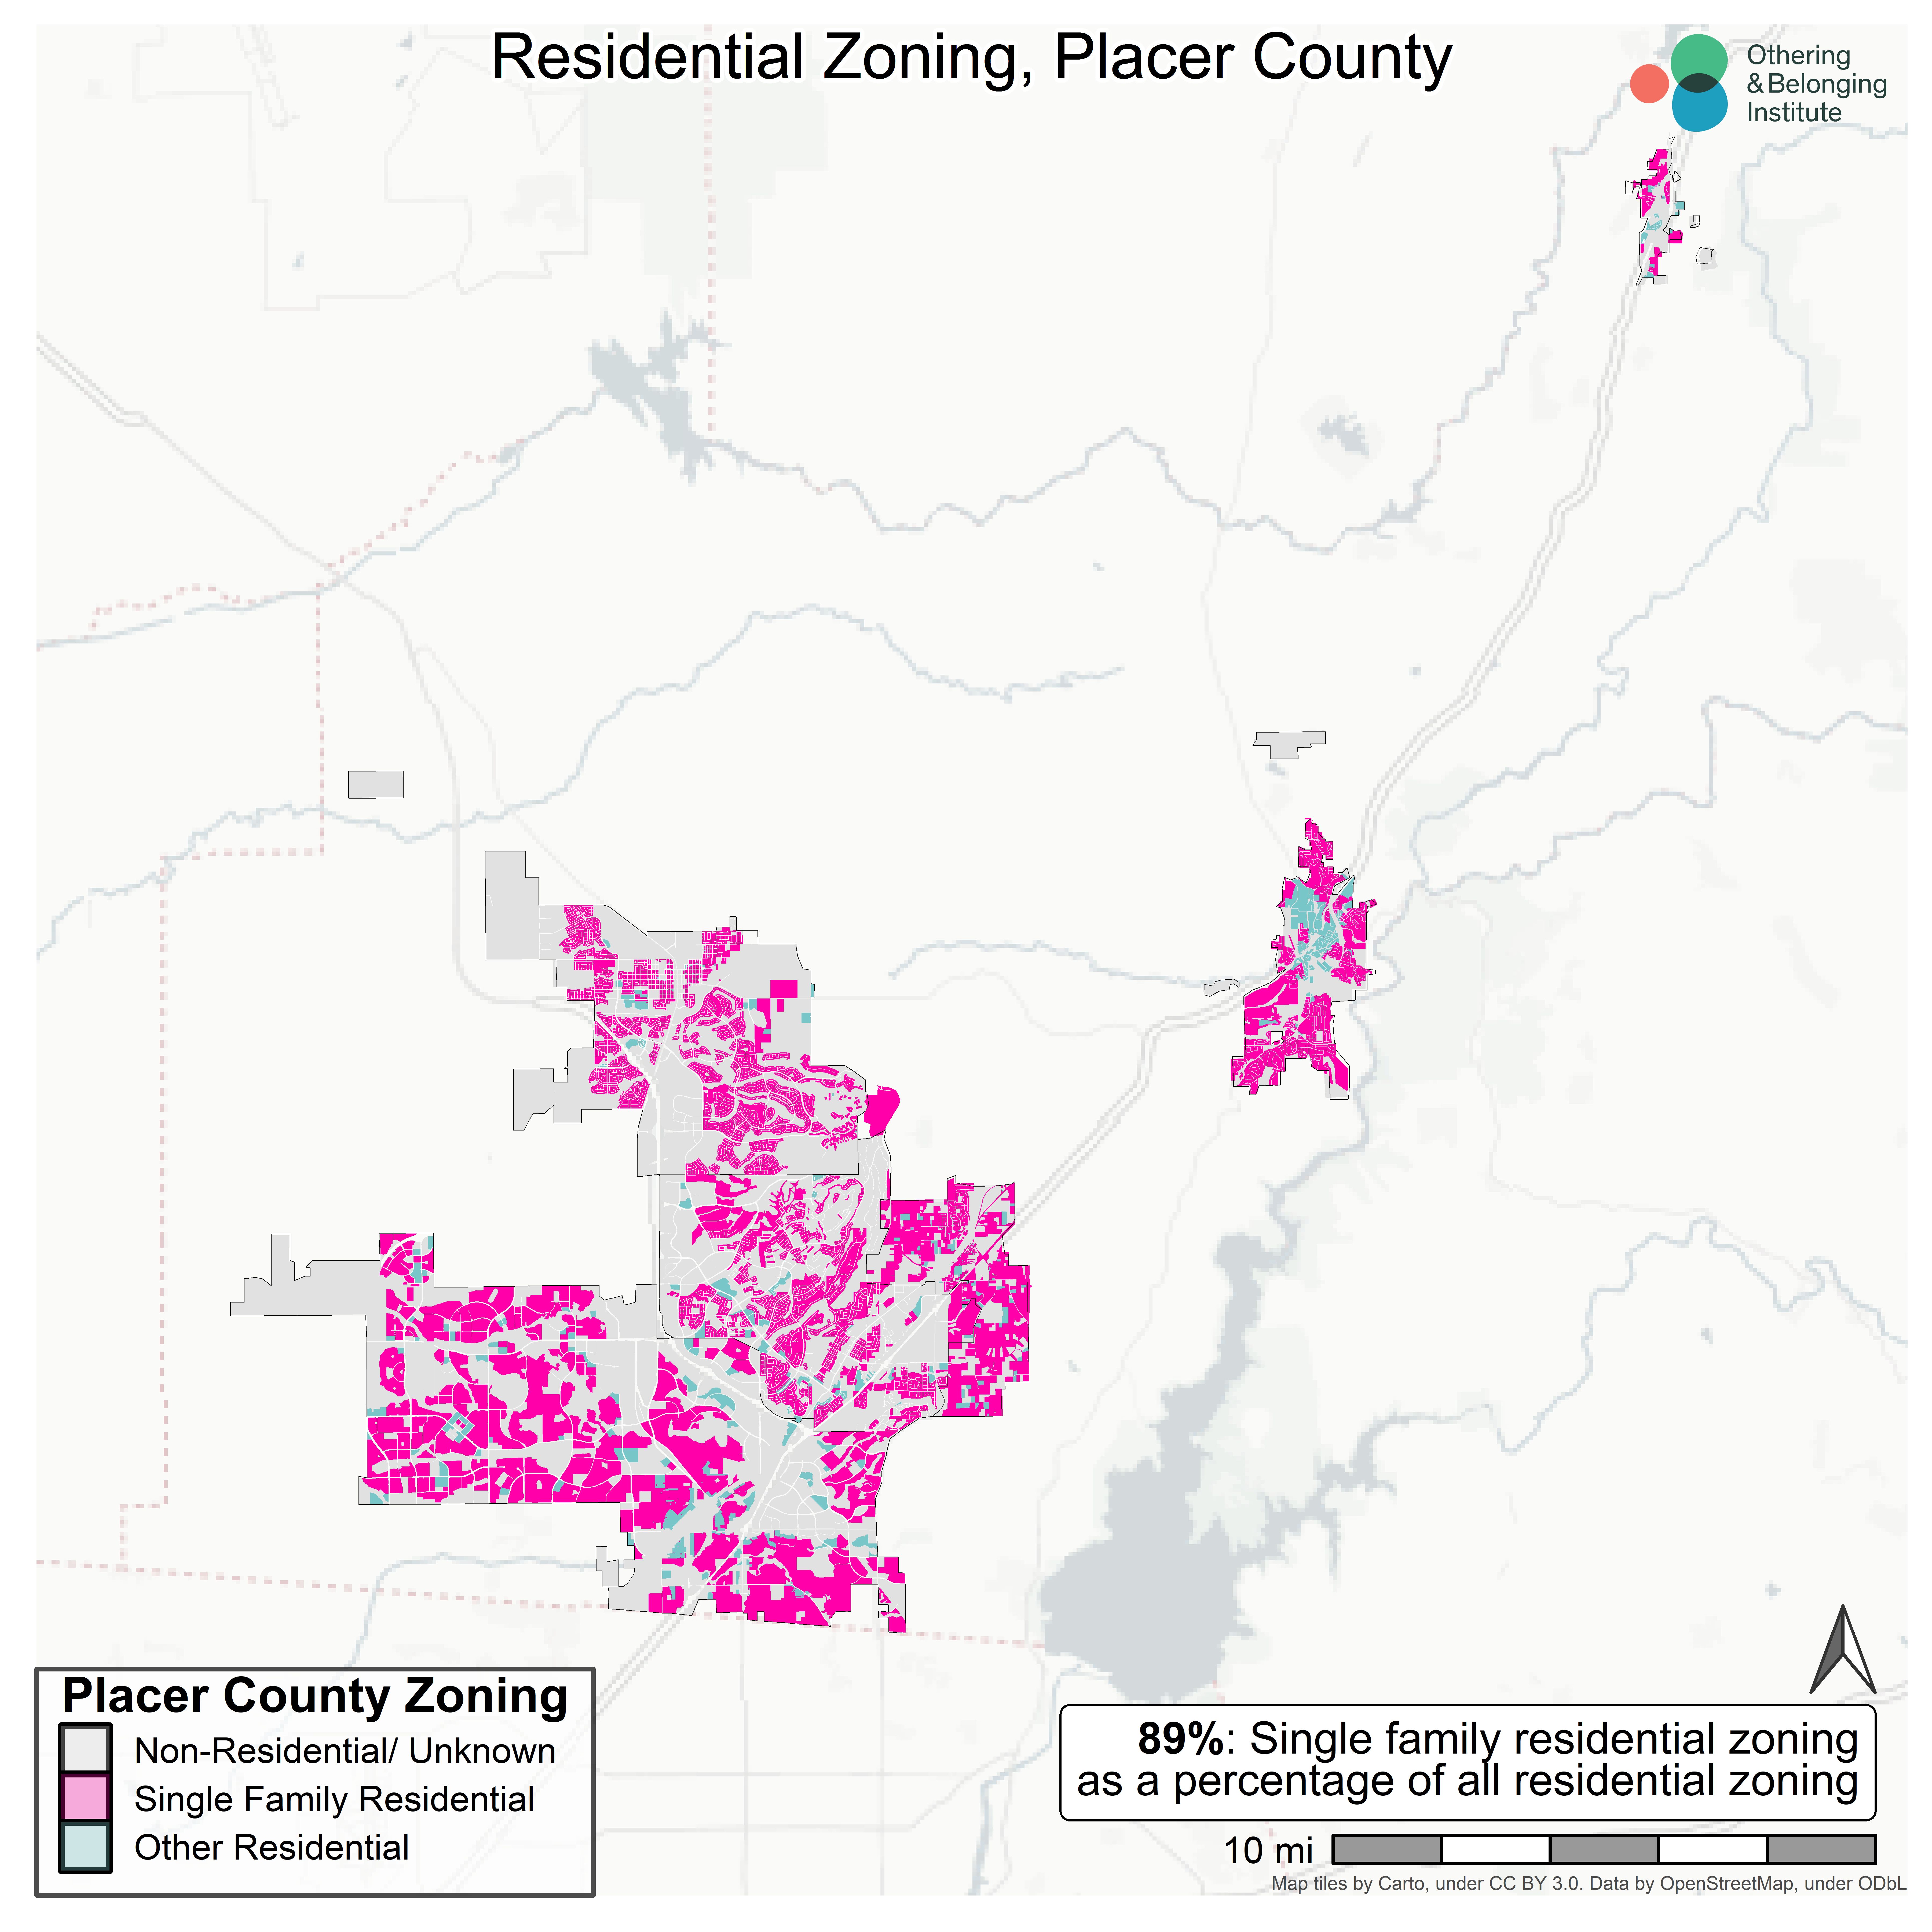 Zoning map of Placer County